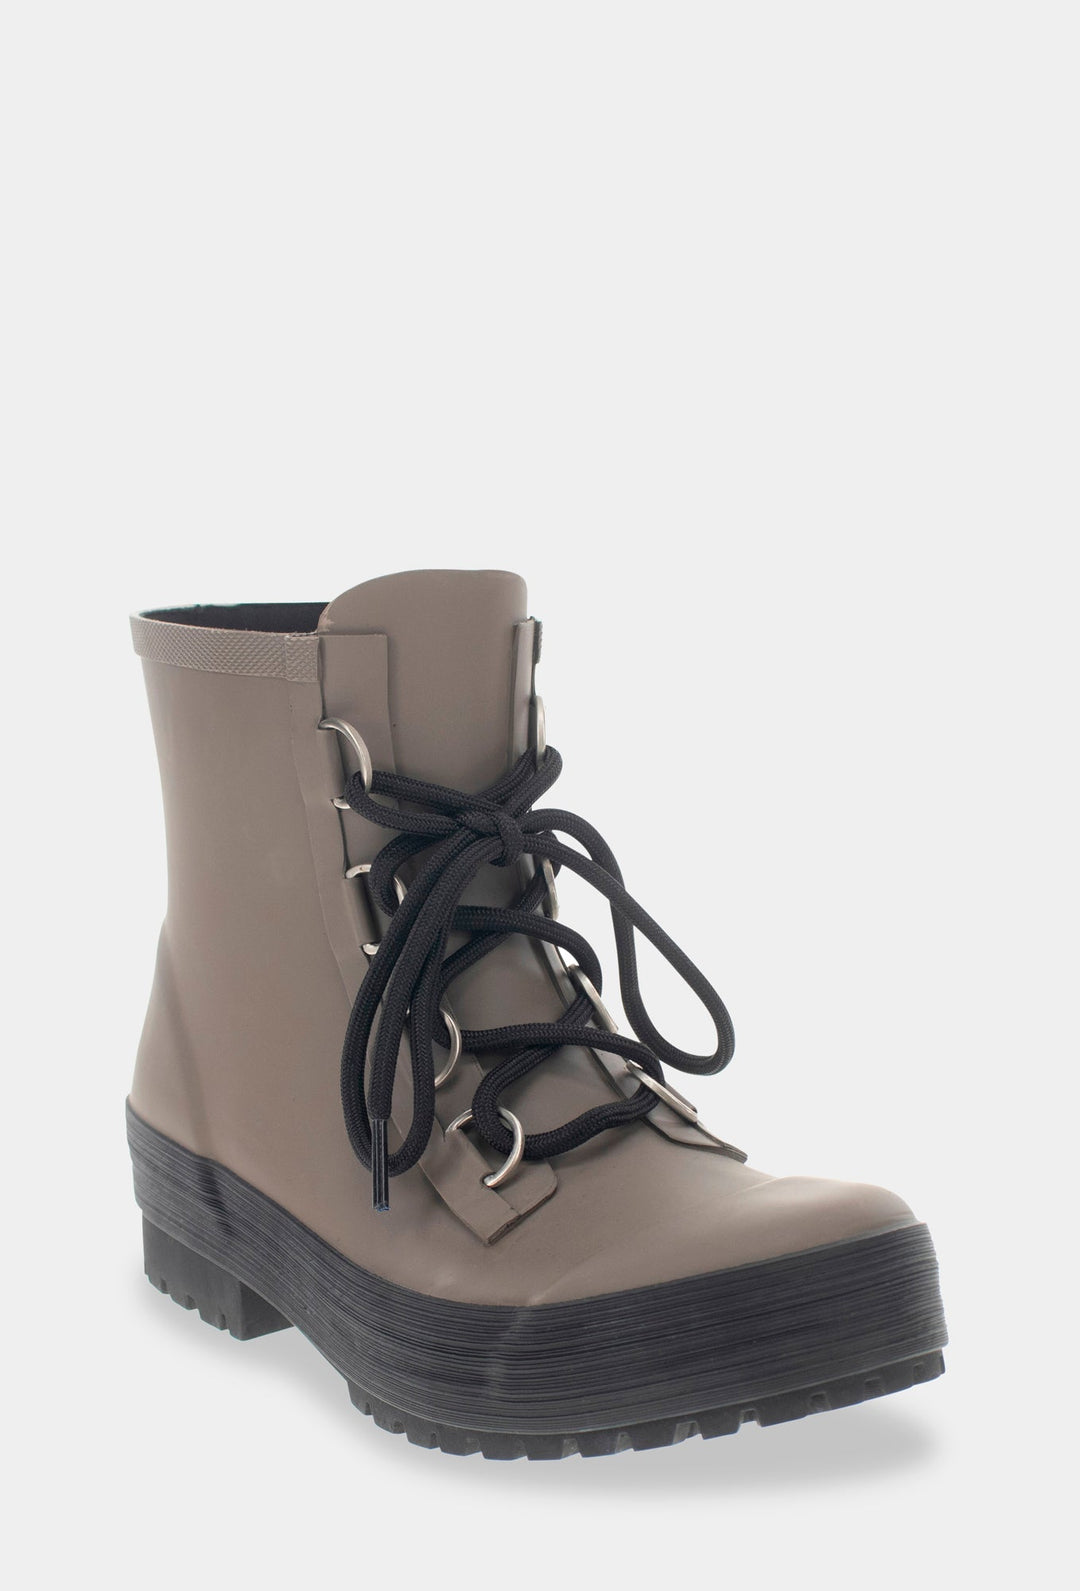 Ava Lace Up Ankle Rain Boot - Dark Taupe - WSC B2B